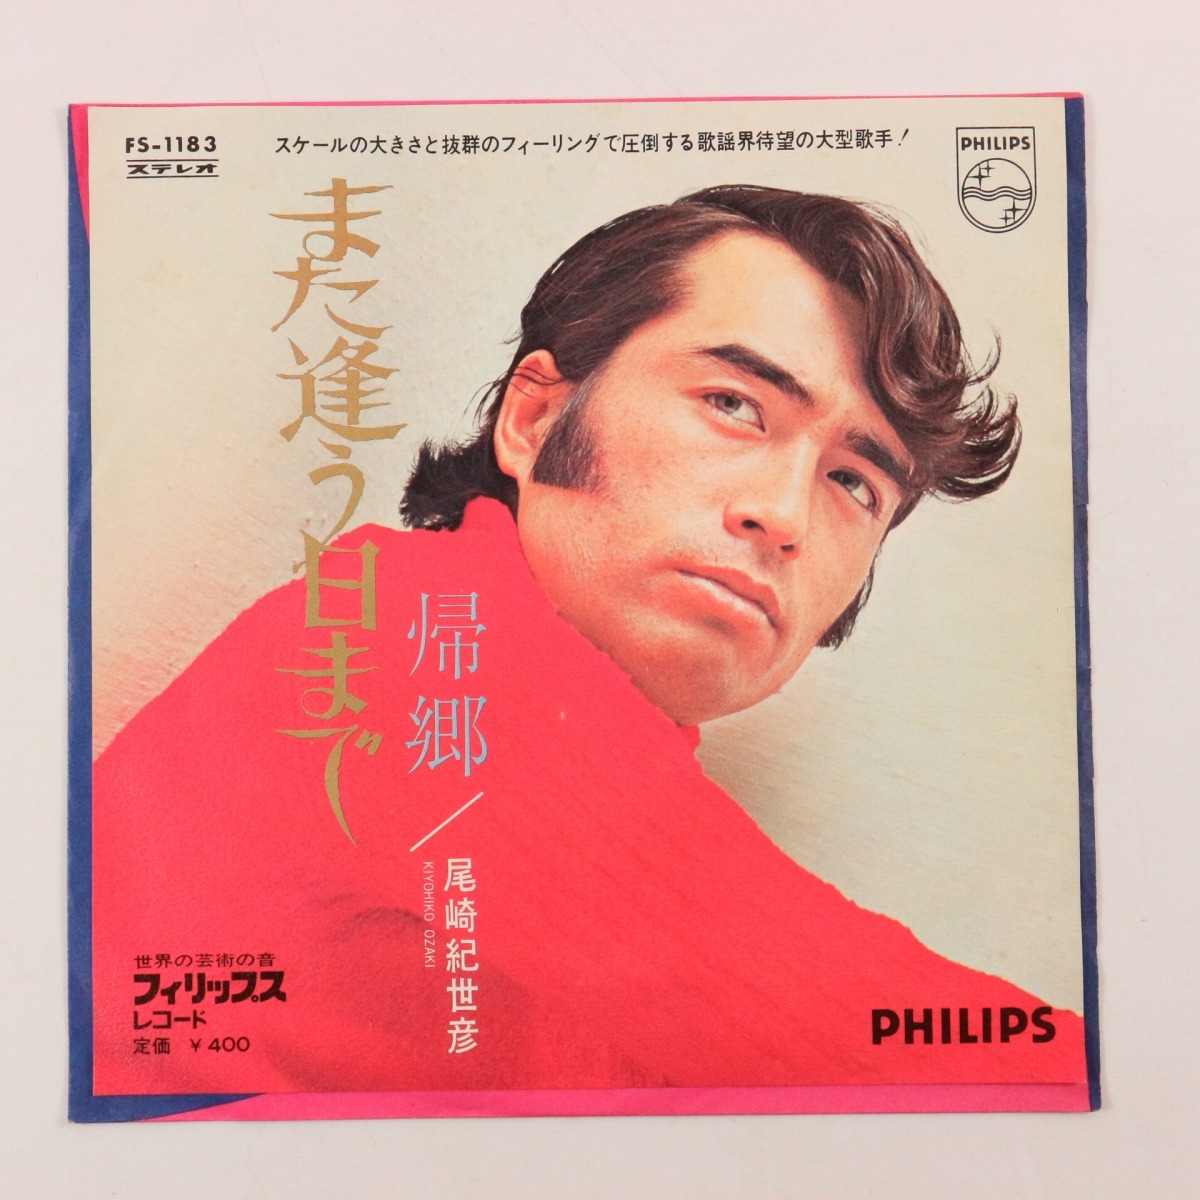 ◆EP◆尾崎紀世彦◆また逢う日まで/帰郷◆Philips FS-1183◆_画像1